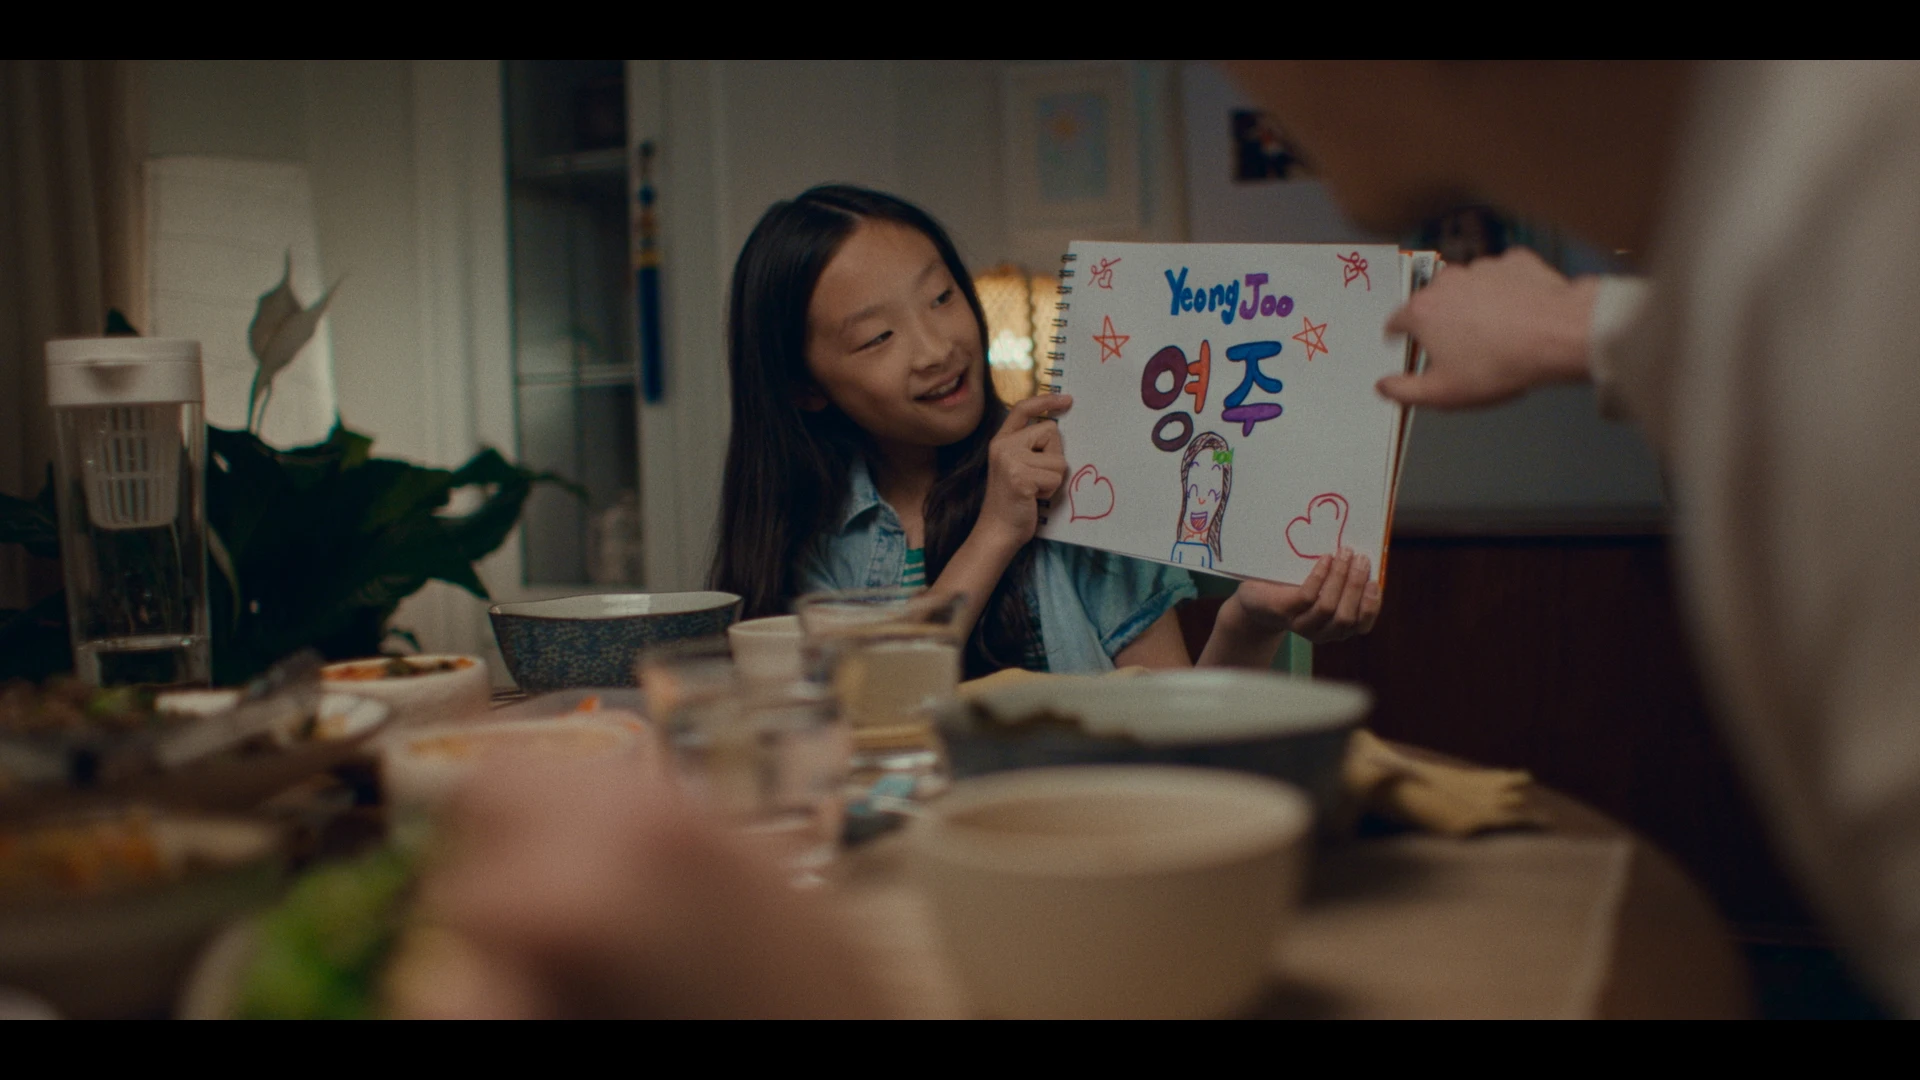 A yound Asian girl with long hair and a blue shirt sits at the dinner table with her family holding a drawing of her name “Yeong Joo.”